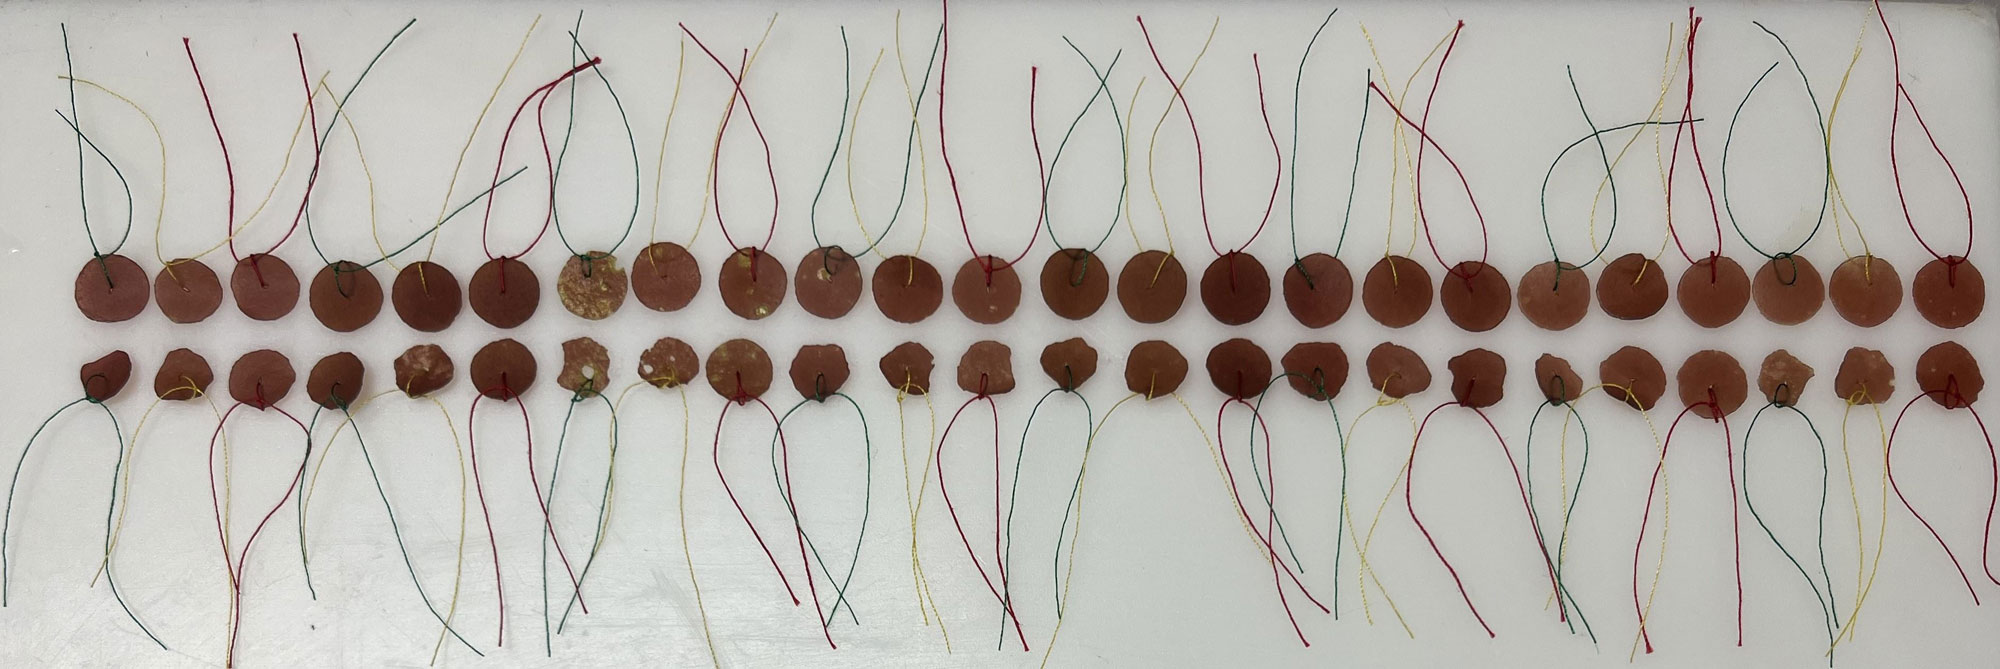 Two rows of red discs leashed by a green, yellow, or red thread